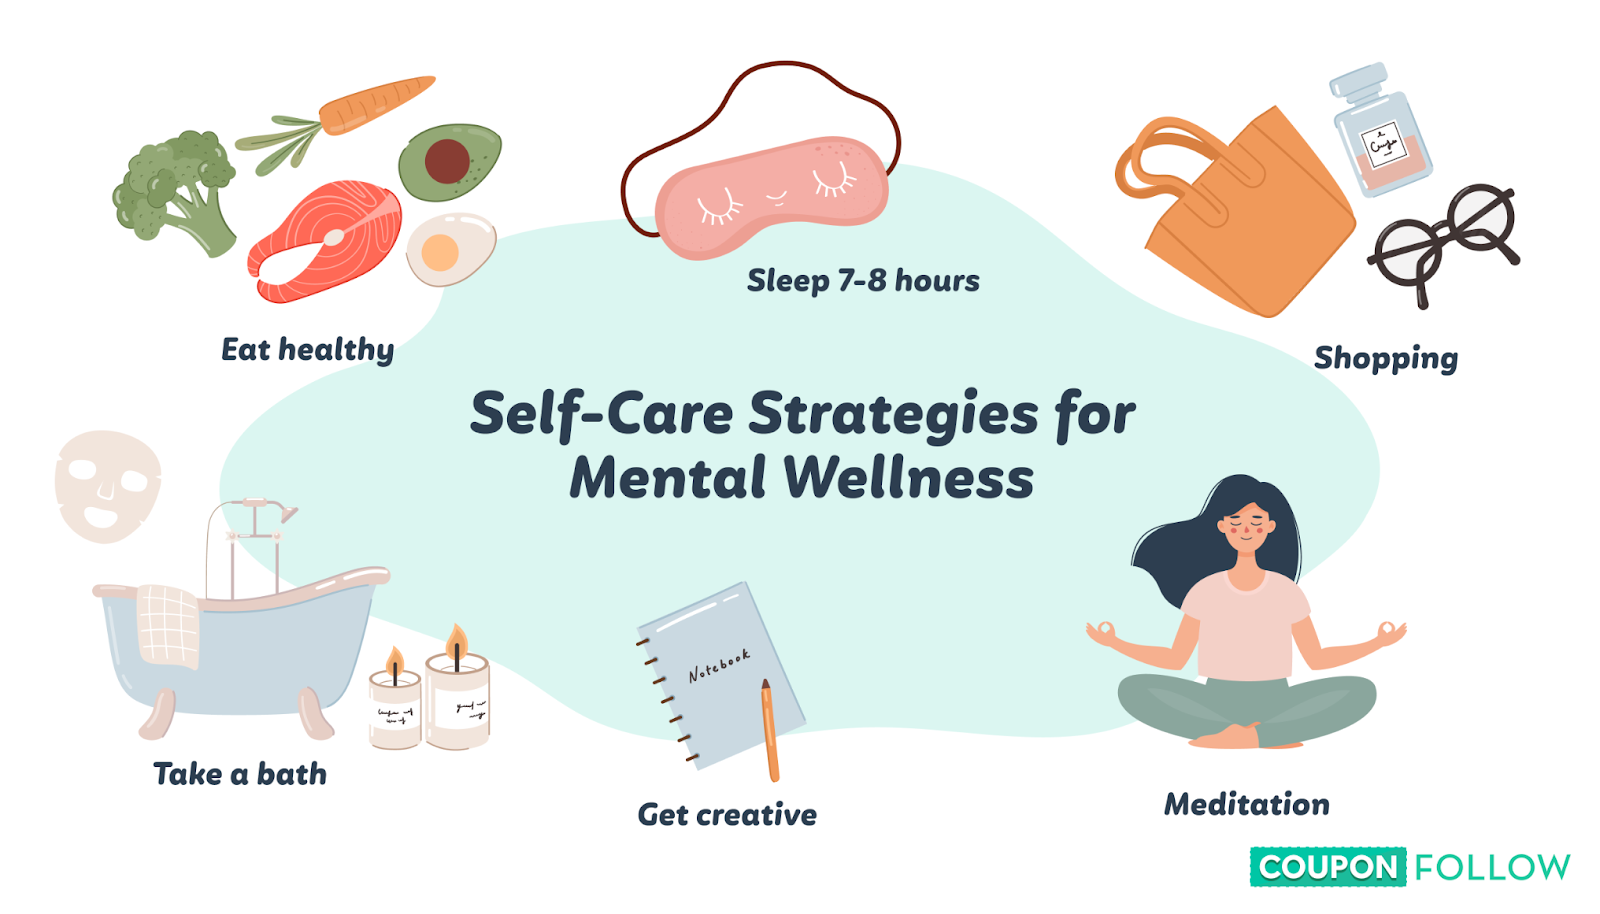 Graphic showing 8 self-care strategies for mental wellness